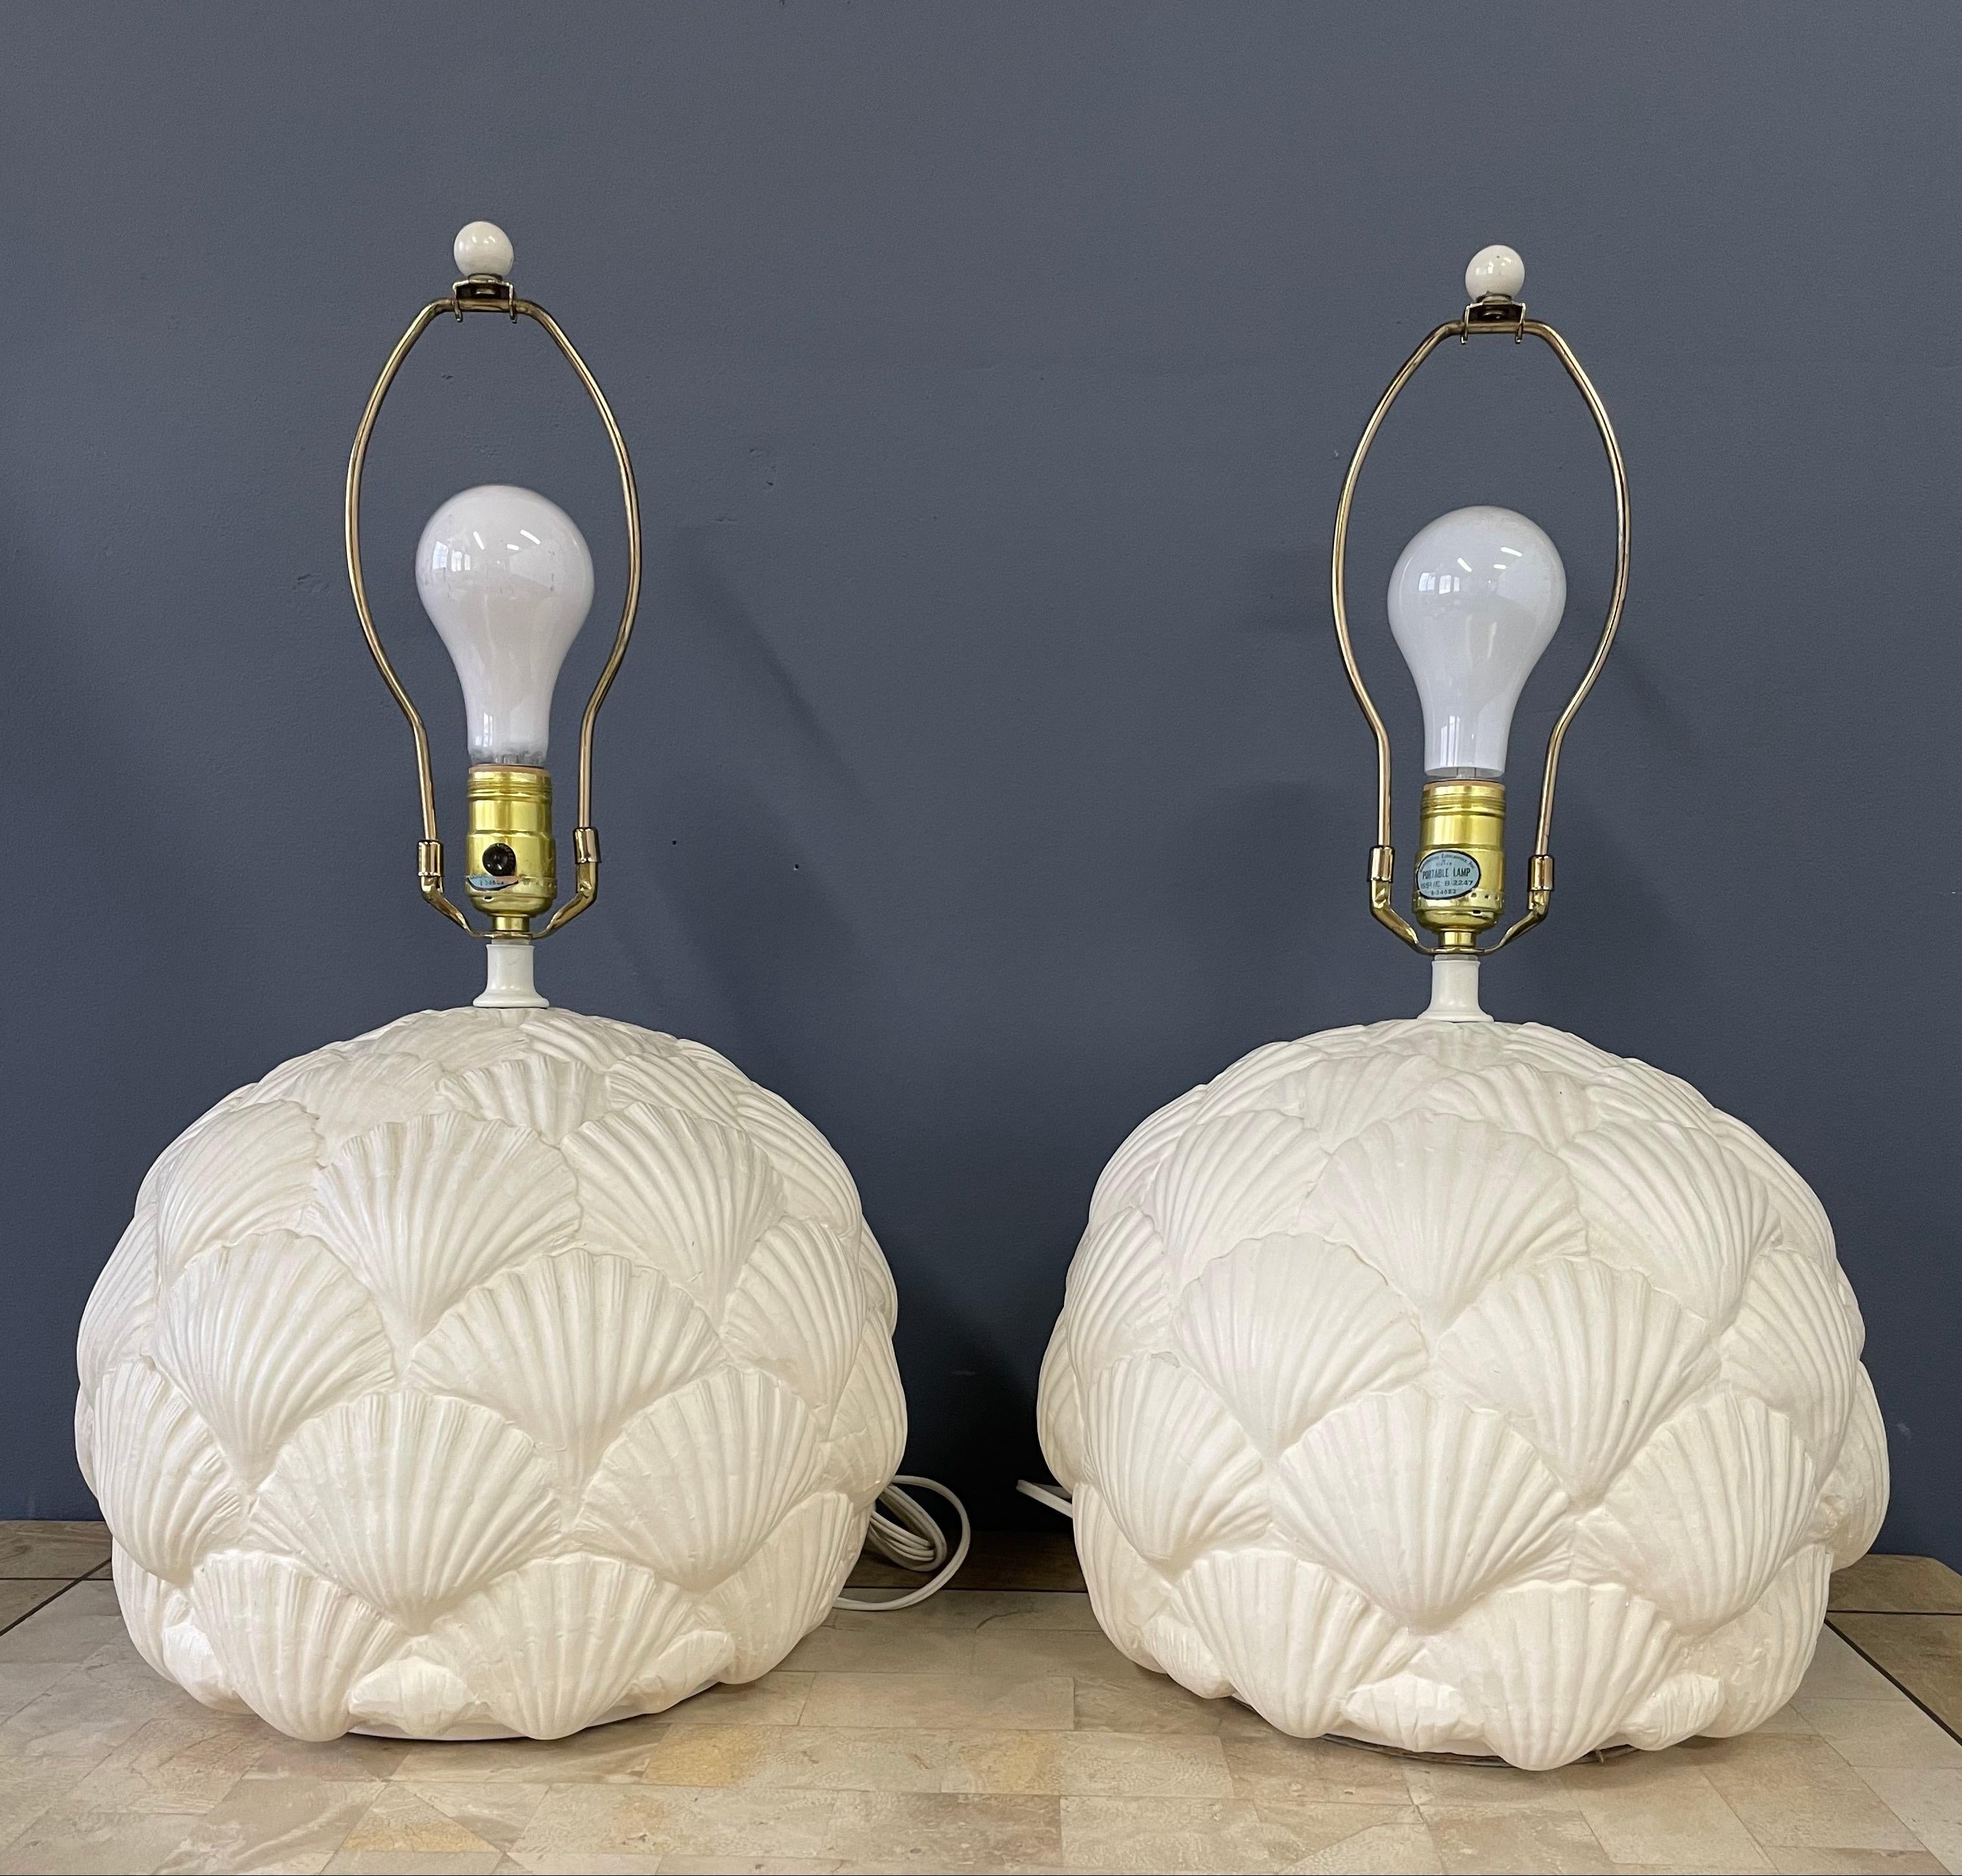 Lovely pair of lamps with an intricate seashell motif. These lamps are ceramic and in wonderful condition.